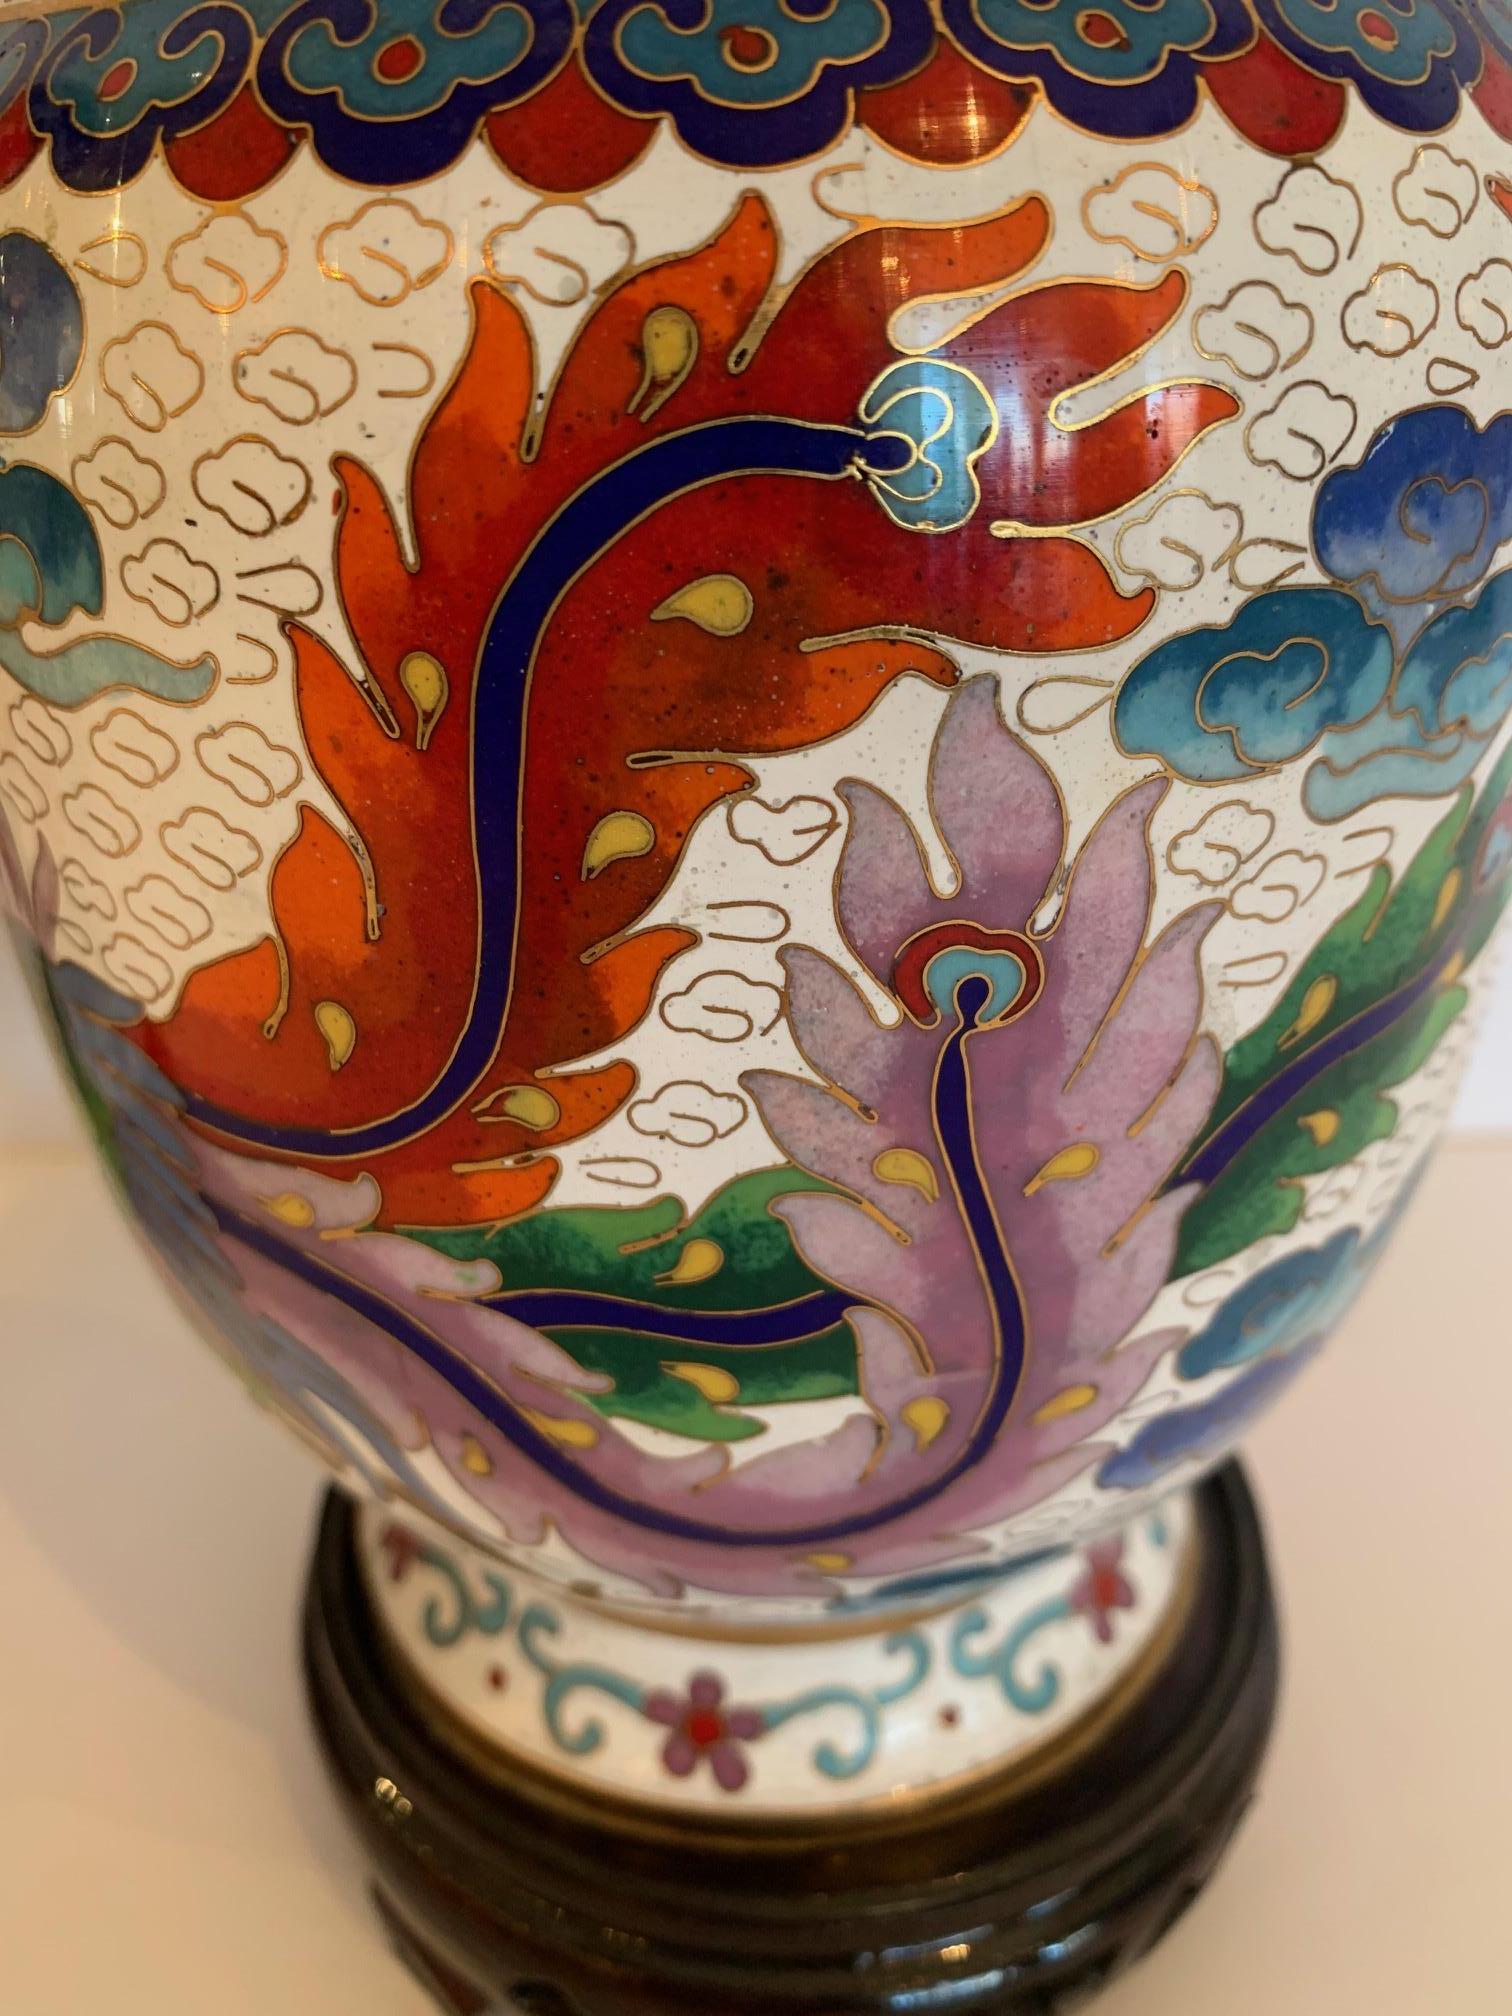 Gorgeous eye-catching pair of cloisonné enamel vases having phoenix birds, dragons and meticulous decoration in green, blue, purple, red, turquoise, yellow and white. There are gilded highlights and the interior of the vase is gold. Bases are